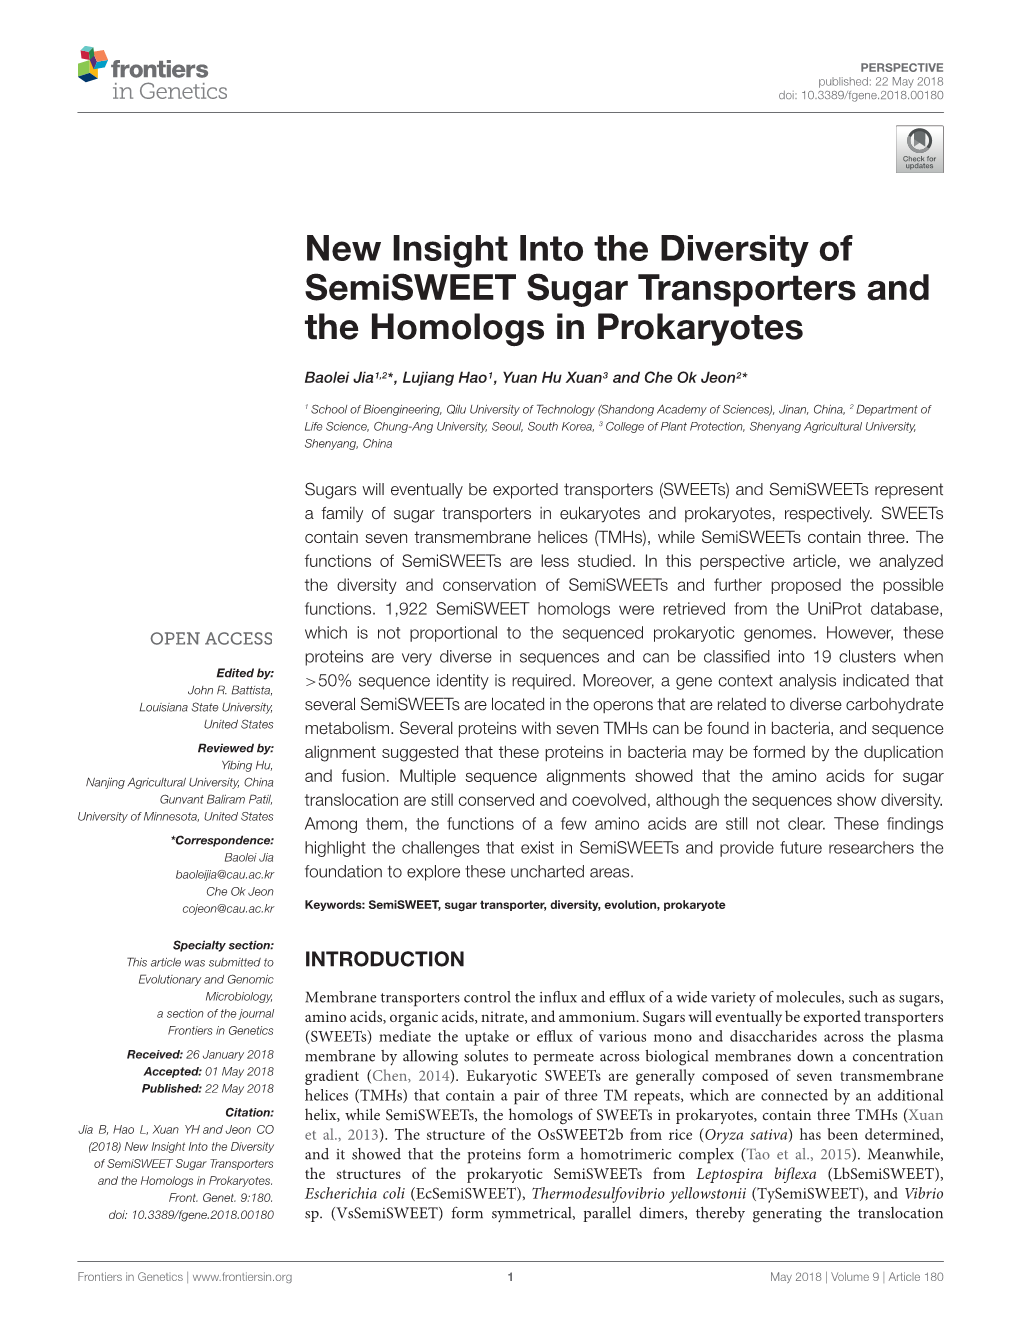 New Insight Into the Diversity of Semisweet Sugar Transporters and the Homologs in Prokaryotes